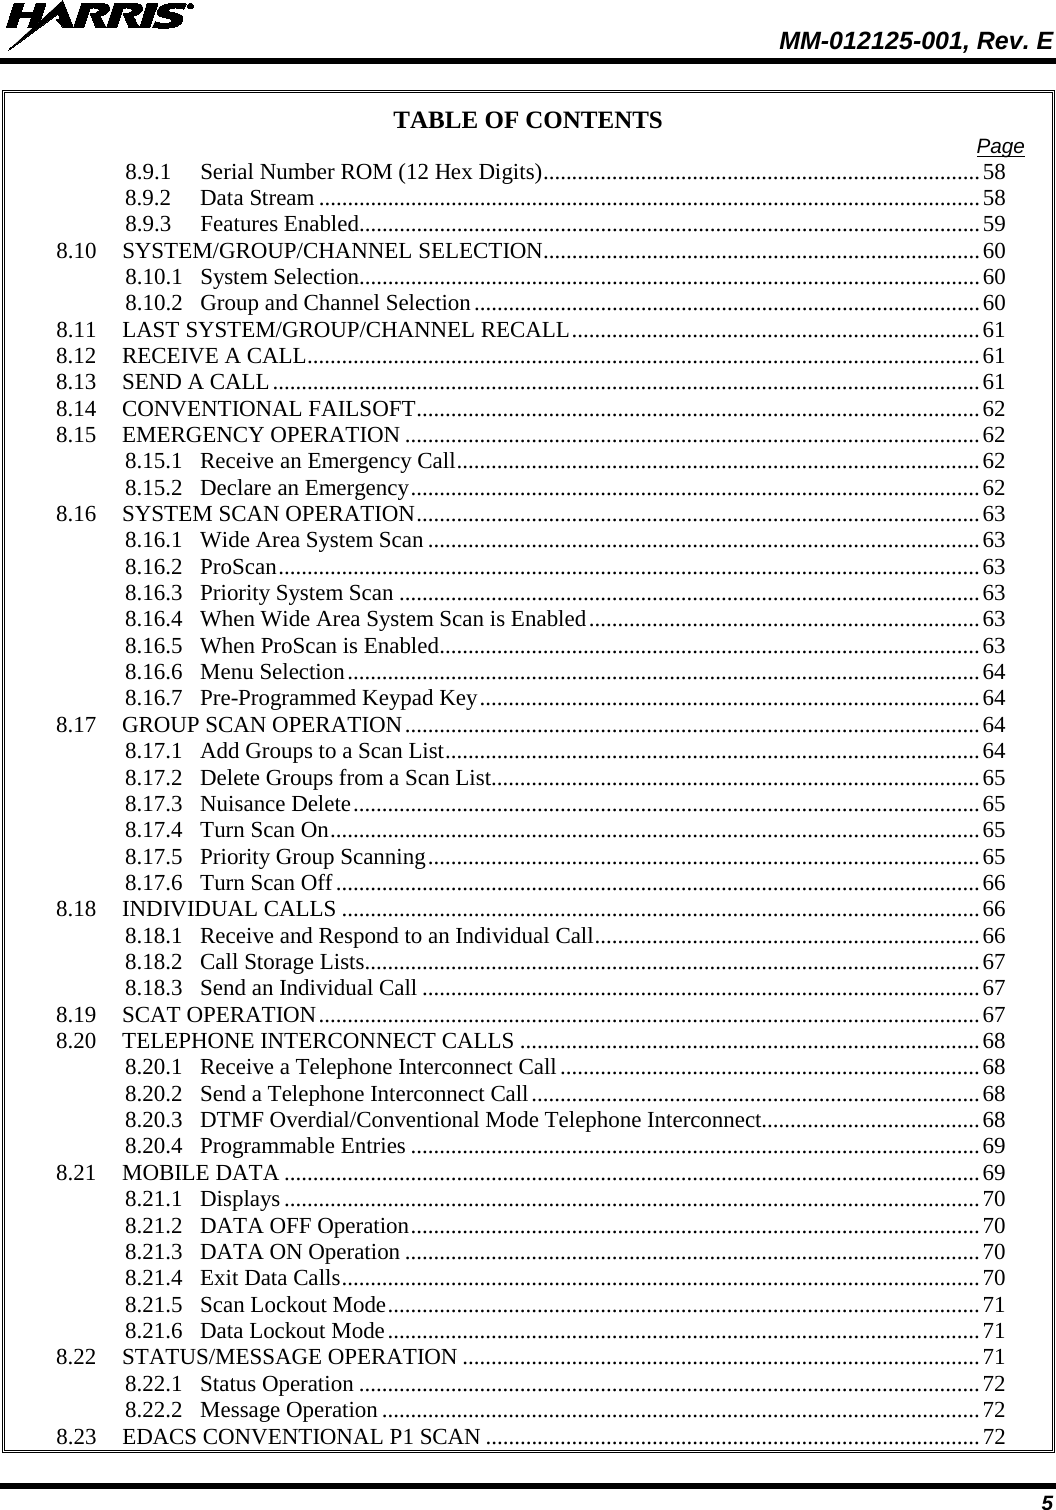  MM-012125-001, Rev. E 5 TABLE OF CONTENTS Page 8.9.1 Serial Number ROM (12 Hex Digits) ............................................................................ 58 8.9.2 Data Stream ................................................................................................................... 58 8.9.3 Features Enabled ............................................................................................................ 59 8.10 SYSTEM/GROUP/CHANNEL SELECTION............................................................................ 60 8.10.1 System Selection ............................................................................................................ 60 8.10.2 Group and Channel Selection ........................................................................................ 60 8.11 LAST SYSTEM/GROUP/CHANNEL RECALL ....................................................................... 61 8.12 RECEIVE A CALL ..................................................................................................................... 61 8.13 SEND A CALL ........................................................................................................................... 61 8.14 CONVENTIONAL FAILSOFT .................................................................................................. 62 8.15 EMERGENCY OPERATION .................................................................................................... 62 8.15.1 Receive an Emergency Call ........................................................................................... 62 8.15.2 Declare an Emergency ................................................................................................... 62 8.16 SYSTEM SCAN OPERATION .................................................................................................. 63 8.16.1 Wide Area System Scan ................................................................................................ 63 8.16.2 ProScan .......................................................................................................................... 63 8.16.3 Priority System Scan ..................................................................................................... 63 8.16.4 When Wide Area System Scan is Enabled .................................................................... 63 8.16.5 When ProScan is Enabled .............................................................................................. 63 8.16.6 Menu Selection .............................................................................................................. 64 8.16.7 Pre-Programmed Keypad Key ....................................................................................... 64 8.17 GROUP SCAN OPERATION .................................................................................................... 64 8.17.1 Add Groups to a Scan List ............................................................................................. 64 8.17.2 Delete Groups from a Scan List..................................................................................... 65 8.17.3 Nuisance Delete ............................................................................................................. 65 8.17.4 Turn Scan On ................................................................................................................. 65 8.17.5 Priority Group Scanning ................................................................................................ 65 8.17.6 Turn Scan Off ................................................................................................................ 66 8.18 INDIVIDUAL CALLS ............................................................................................................... 66 8.18.1 Receive and Respond to an Individual Call ................................................................... 66 8.18.2 Call Storage Lists ........................................................................................................... 67 8.18.3 Send an Individual Call ................................................................................................. 67 8.19 SCAT OPERATION ................................................................................................................... 67 8.20 TELEPHONE INTERCONNECT CALLS ................................................................................ 68 8.20.1 Receive a Telephone Interconnect Call ......................................................................... 68 8.20.2 Send a Telephone Interconnect Call .............................................................................. 68 8.20.3 DTMF Overdial/Conventional Mode Telephone Interconnect...................................... 68 8.20.4 Programmable Entries ................................................................................................... 69 8.21 MOBILE DATA ......................................................................................................................... 69 8.21.1 Displays ......................................................................................................................... 70 8.21.2 DATA OFF Operation ................................................................................................... 70 8.21.3 DATA ON Operation .................................................................................................... 70 8.21.4 Exit Data Calls ............................................................................................................... 70 8.21.5 Scan Lockout Mode ....................................................................................................... 71 8.21.6 Data Lockout Mode ....................................................................................................... 71 8.22 STATUS/MESSAGE OPERATION .......................................................................................... 71 8.22.1 Status Operation ............................................................................................................ 72 8.22.2 Message Operation ........................................................................................................ 72 8.23 EDACS CONVENTIONAL P1 SCAN ...................................................................................... 72 